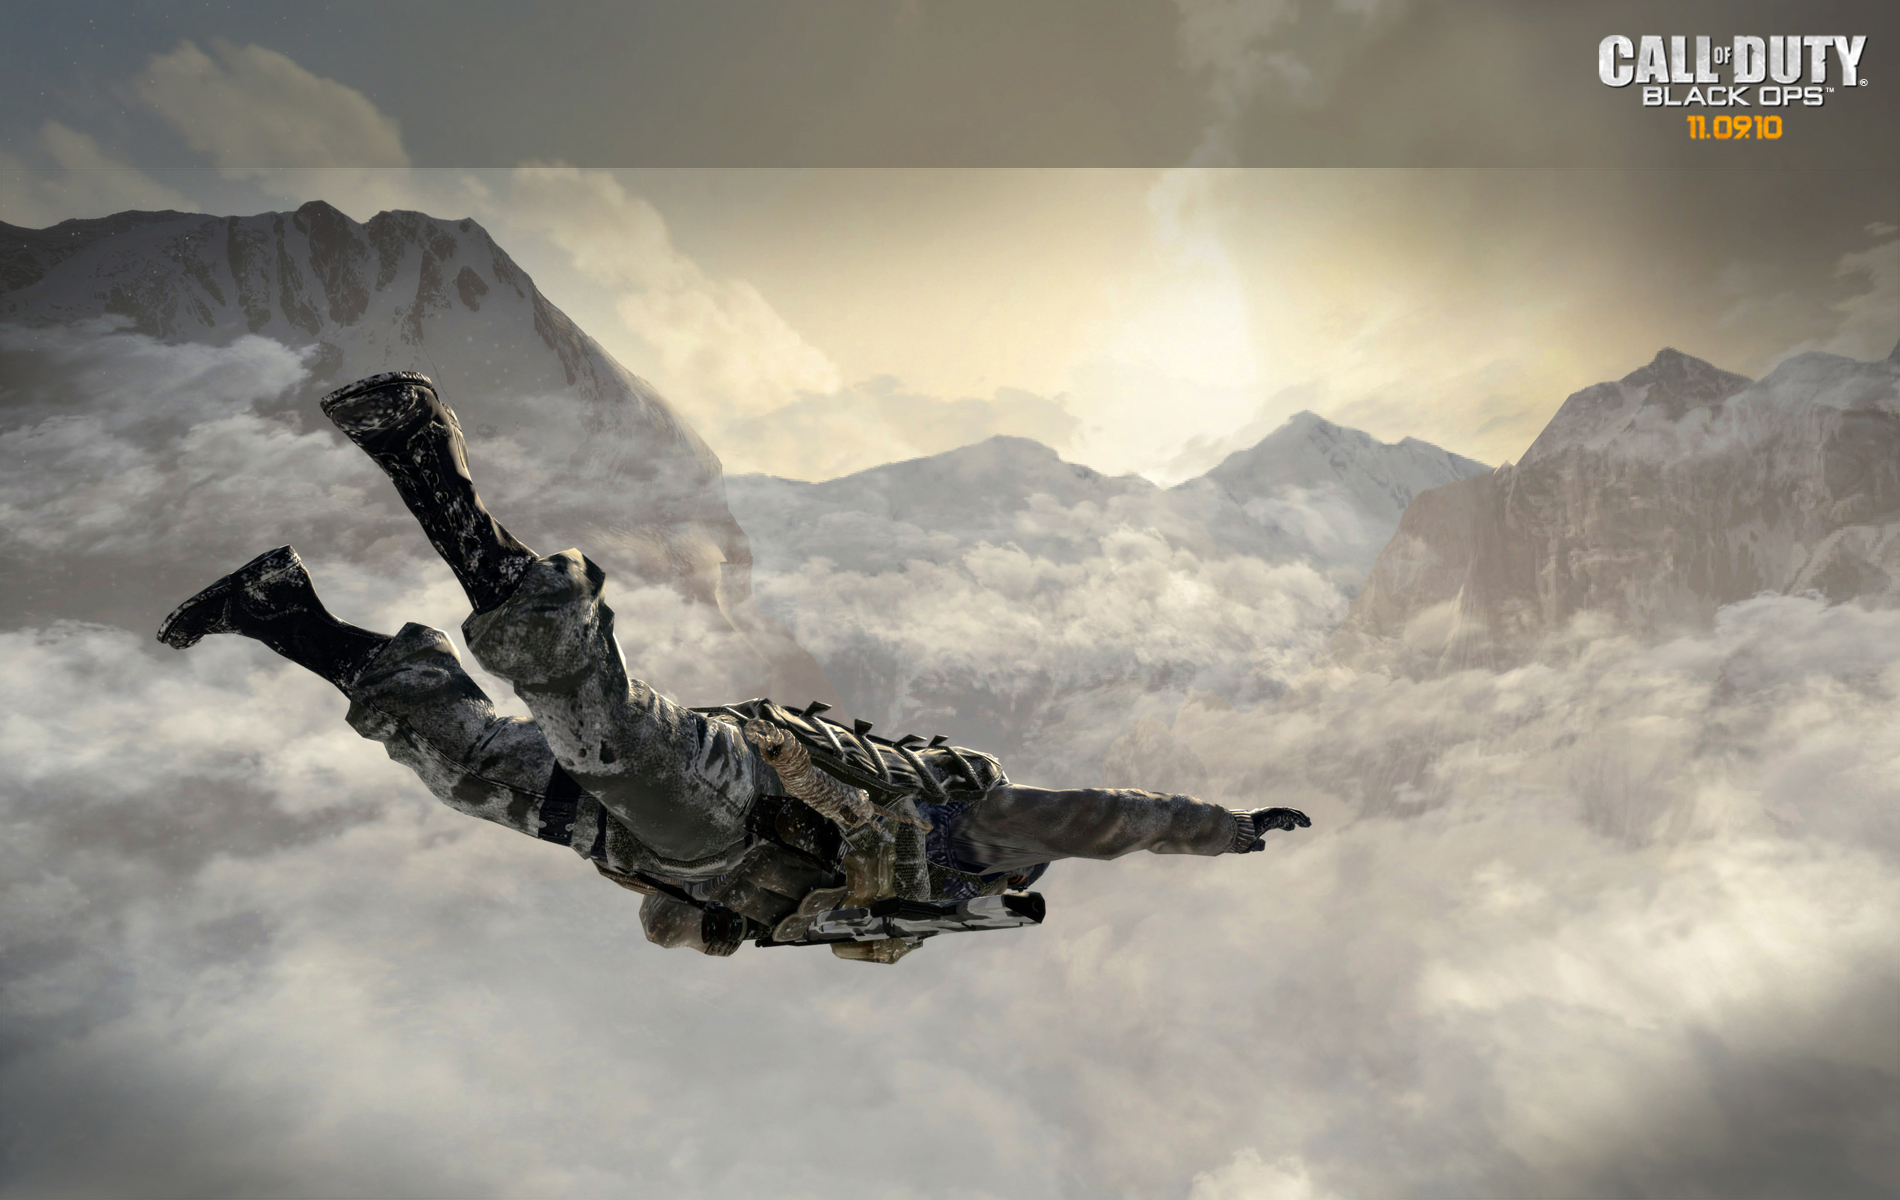 CIA Soldier in Midair  Free Call of Duty Black Ops